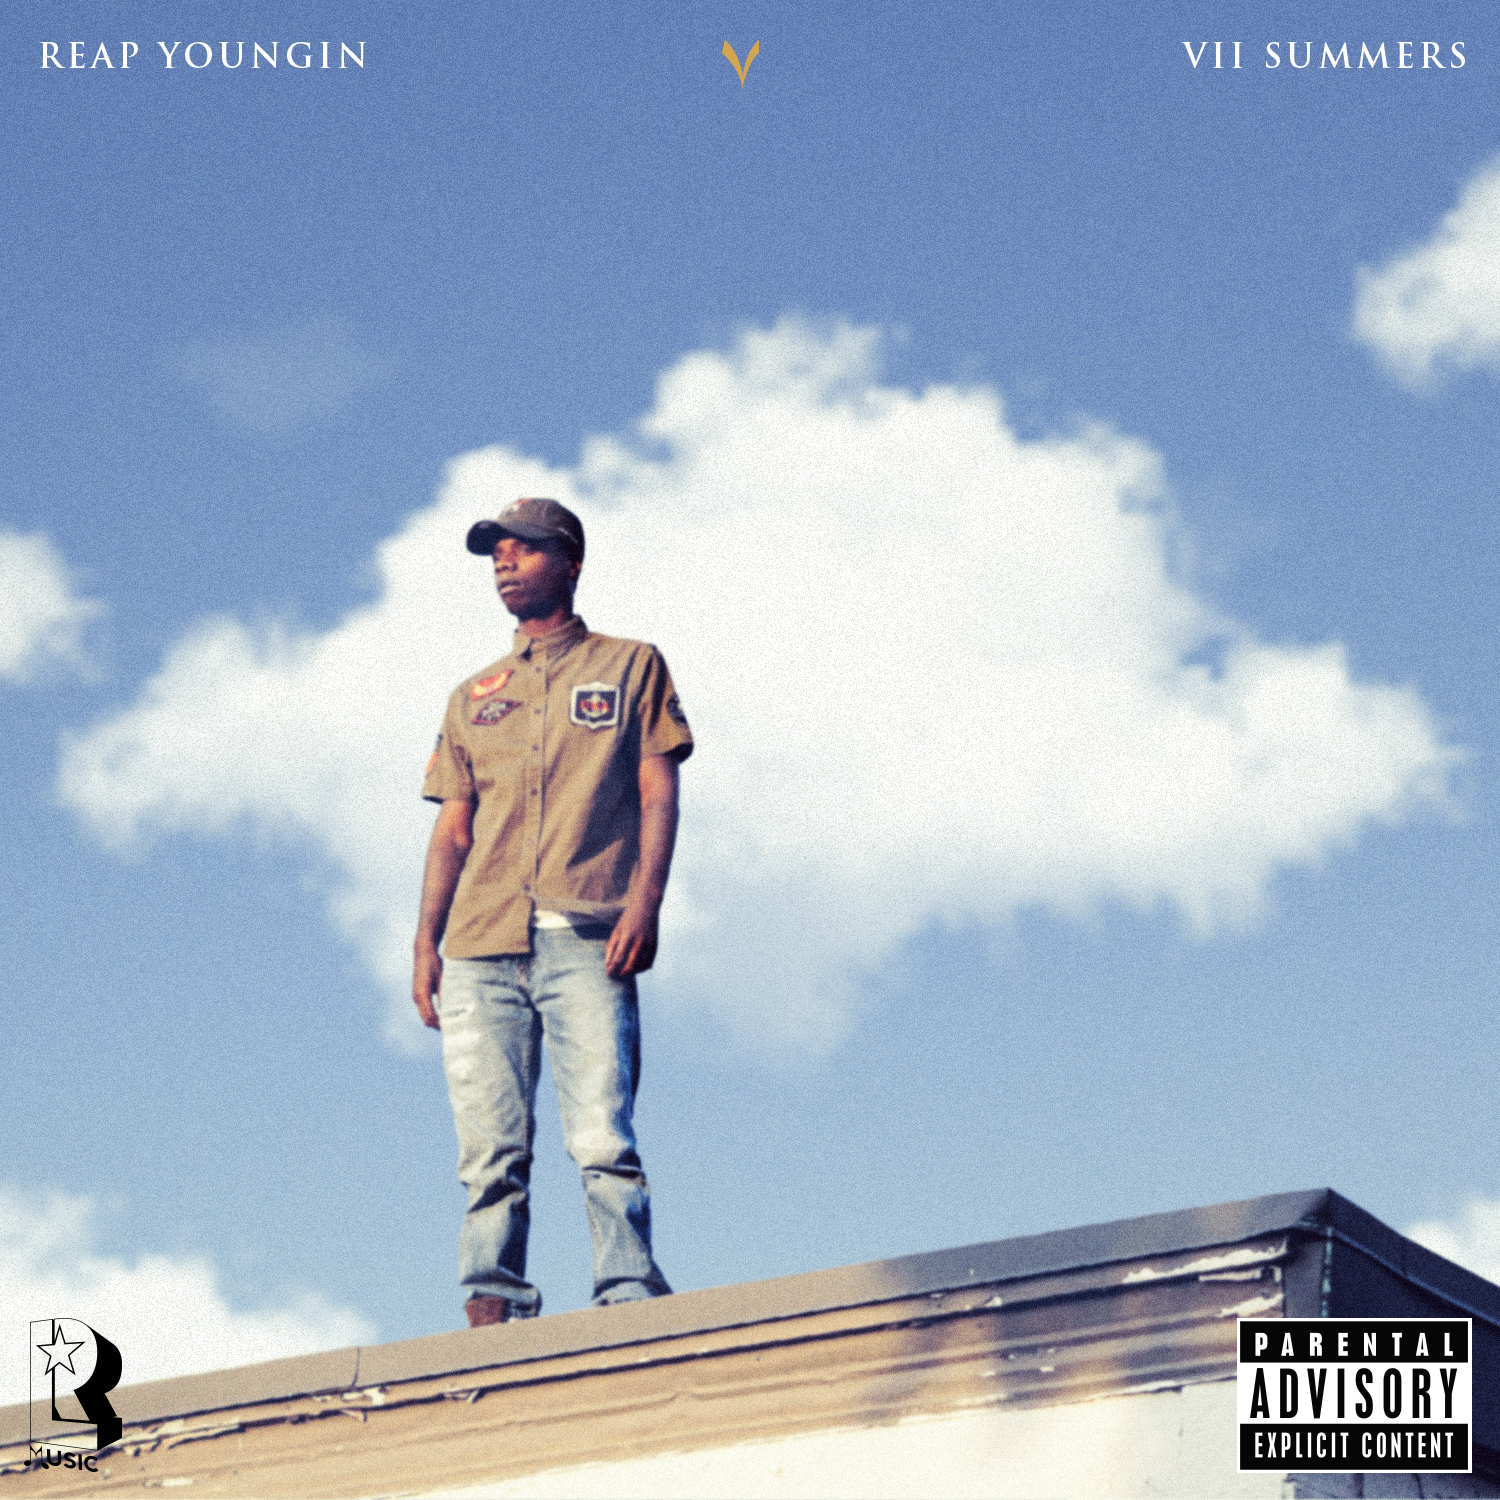 Video: Reap Youngin “Summer in the 7” (Feat Big O)